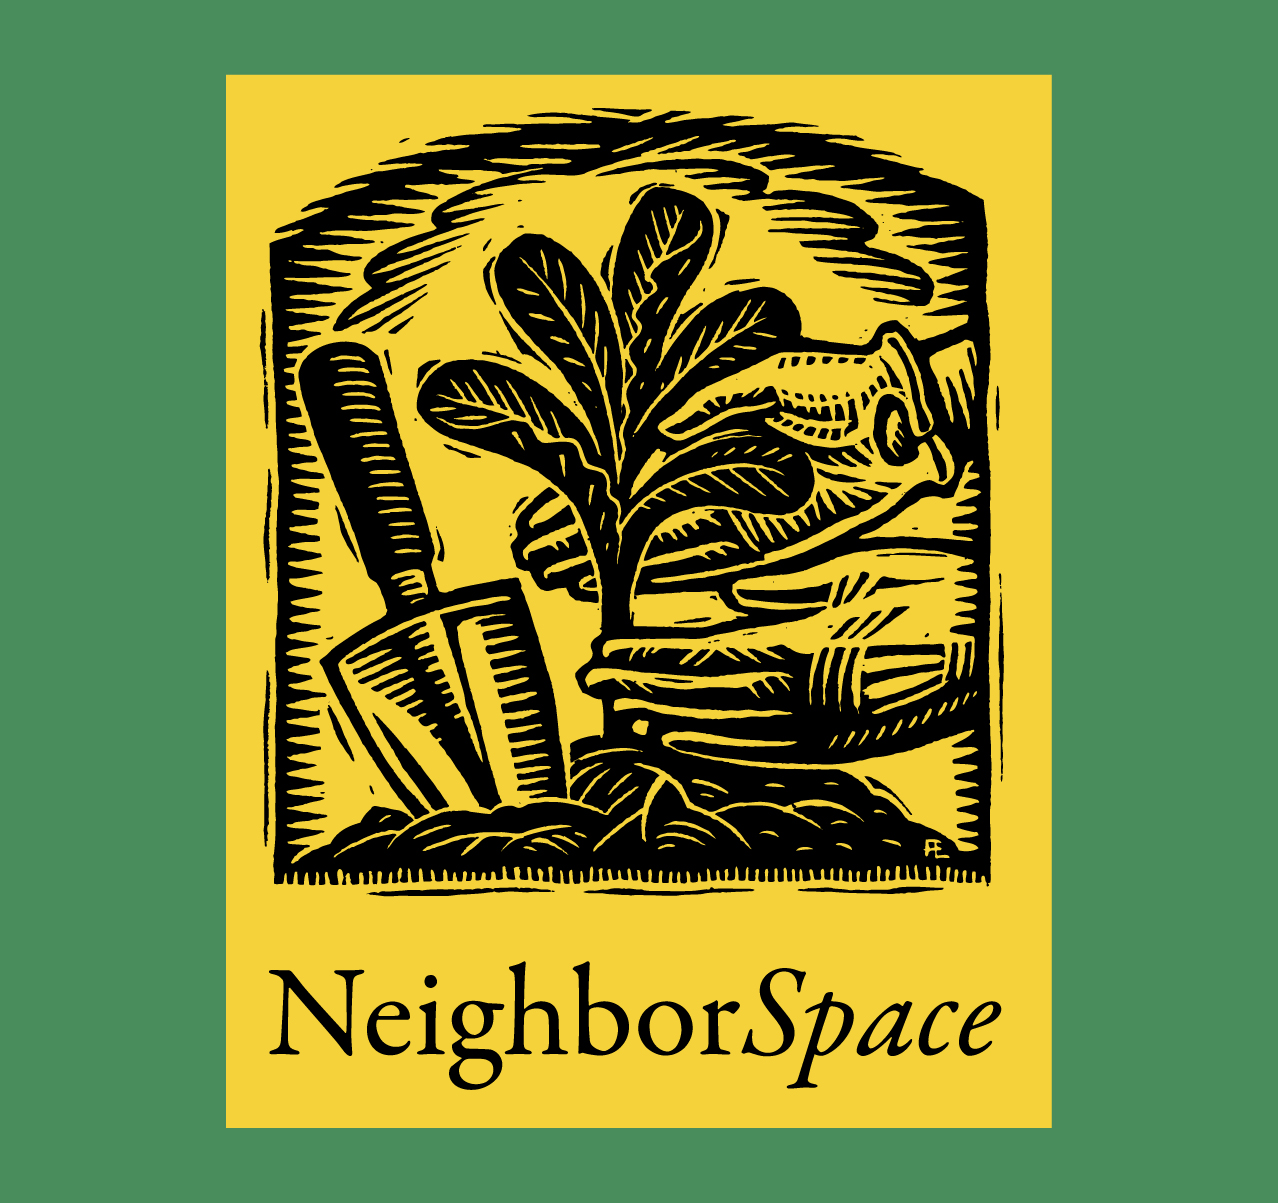 Workshop: A First Aid Kit For NeighborSpace Gardens – Red Cross Training, Chicago Cares Training